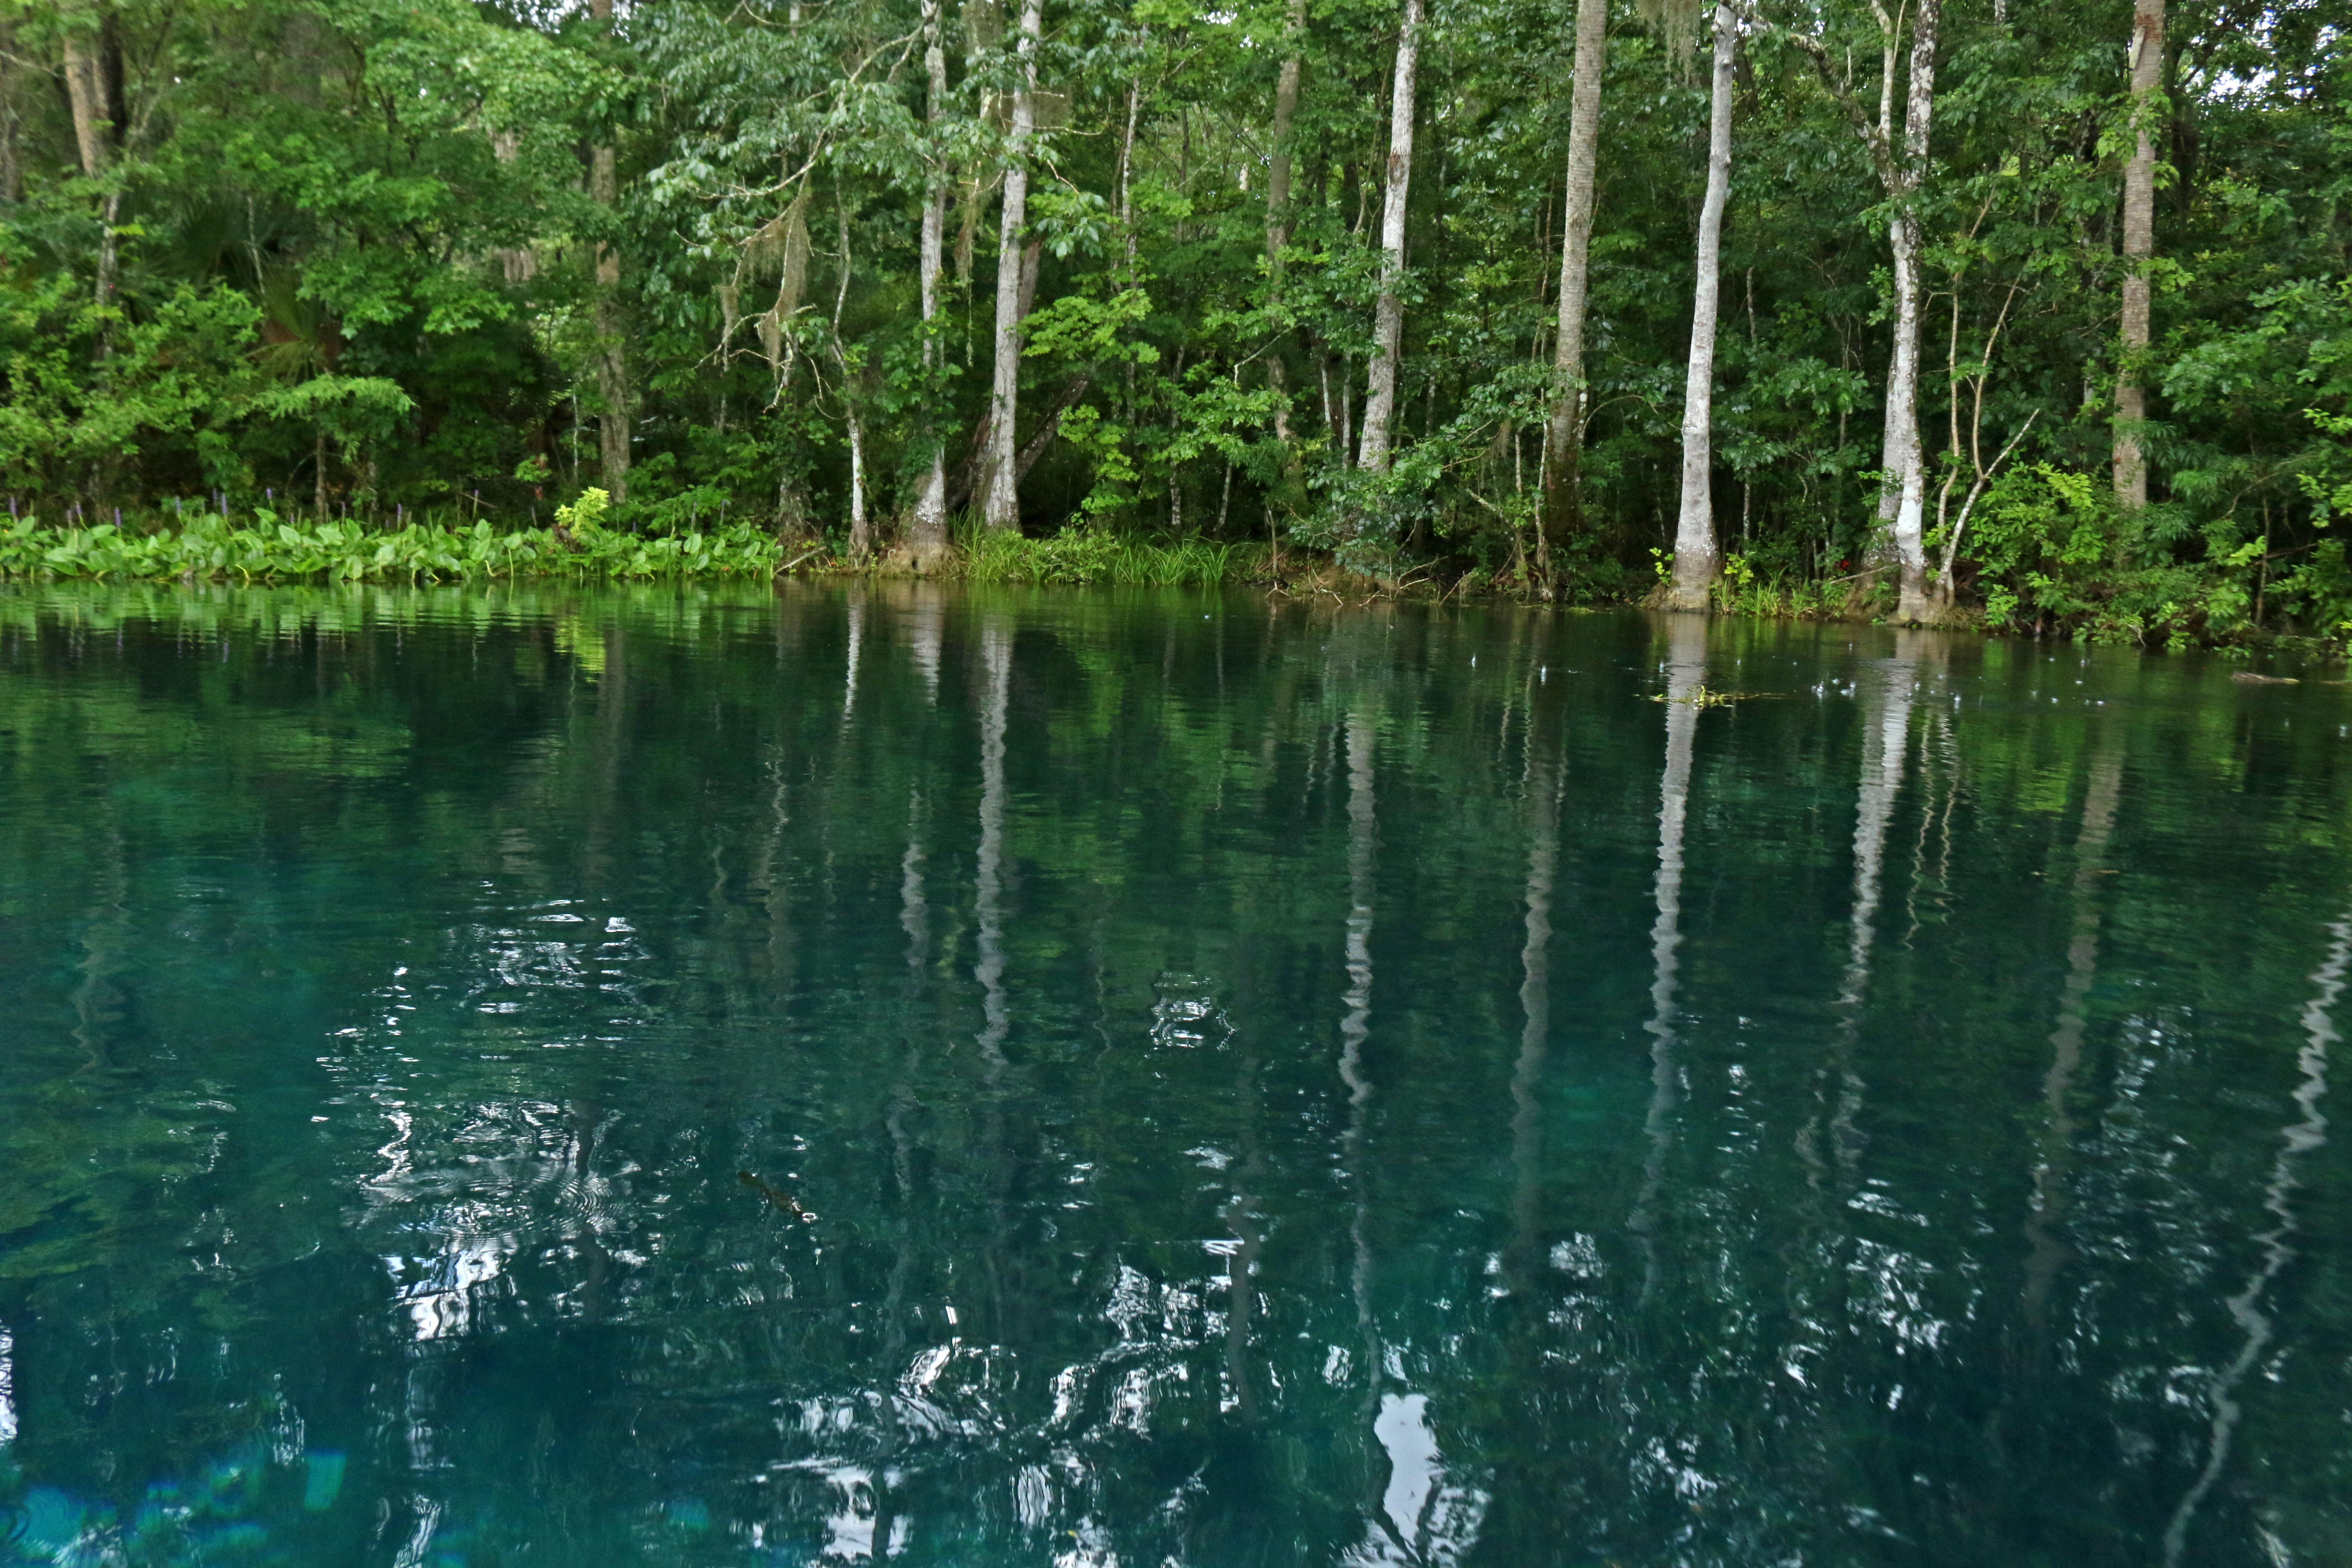 The water of Silver Springs State Park with trees in the background.